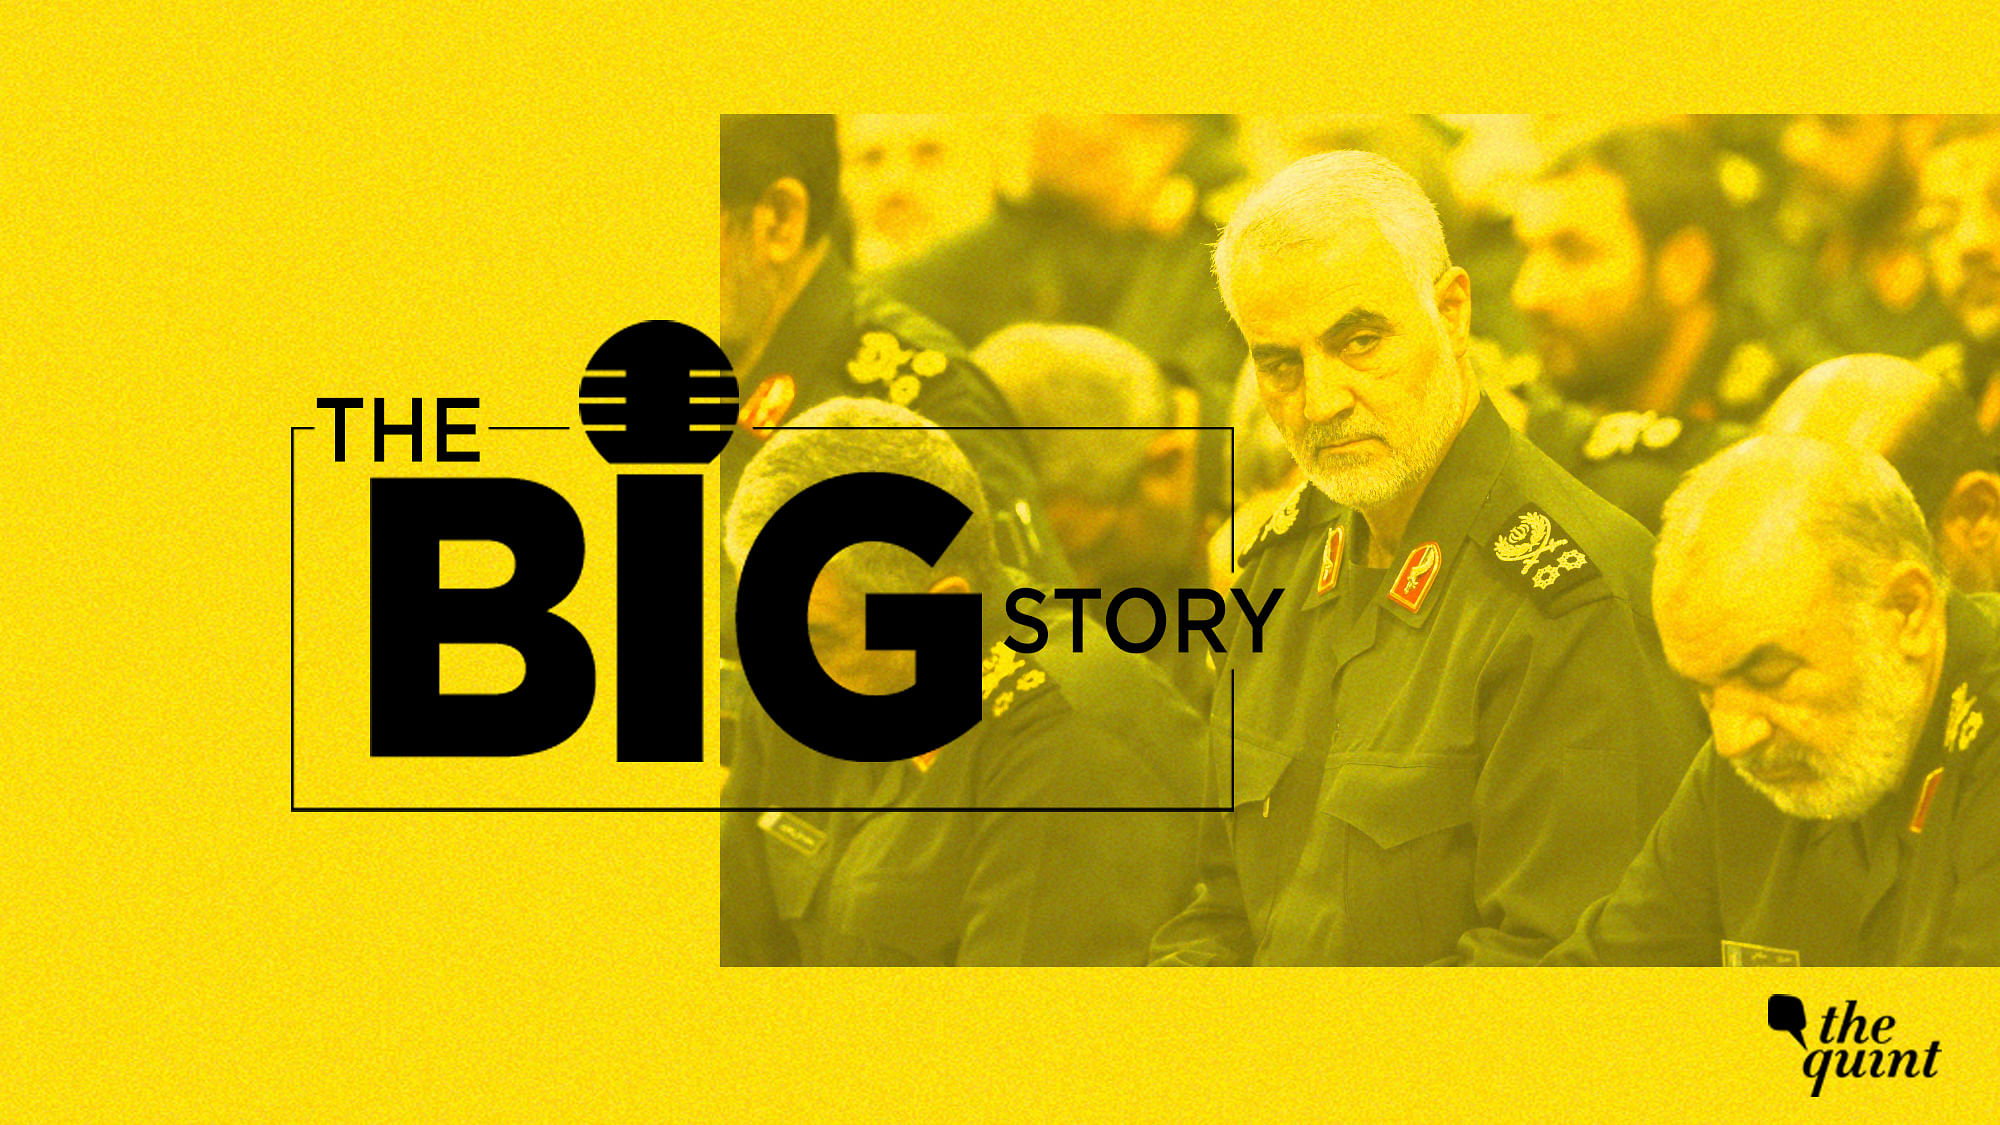 Iran has sworn revenge for General Soleimani’s death. But what makes one man so important? We explain on The Big Story